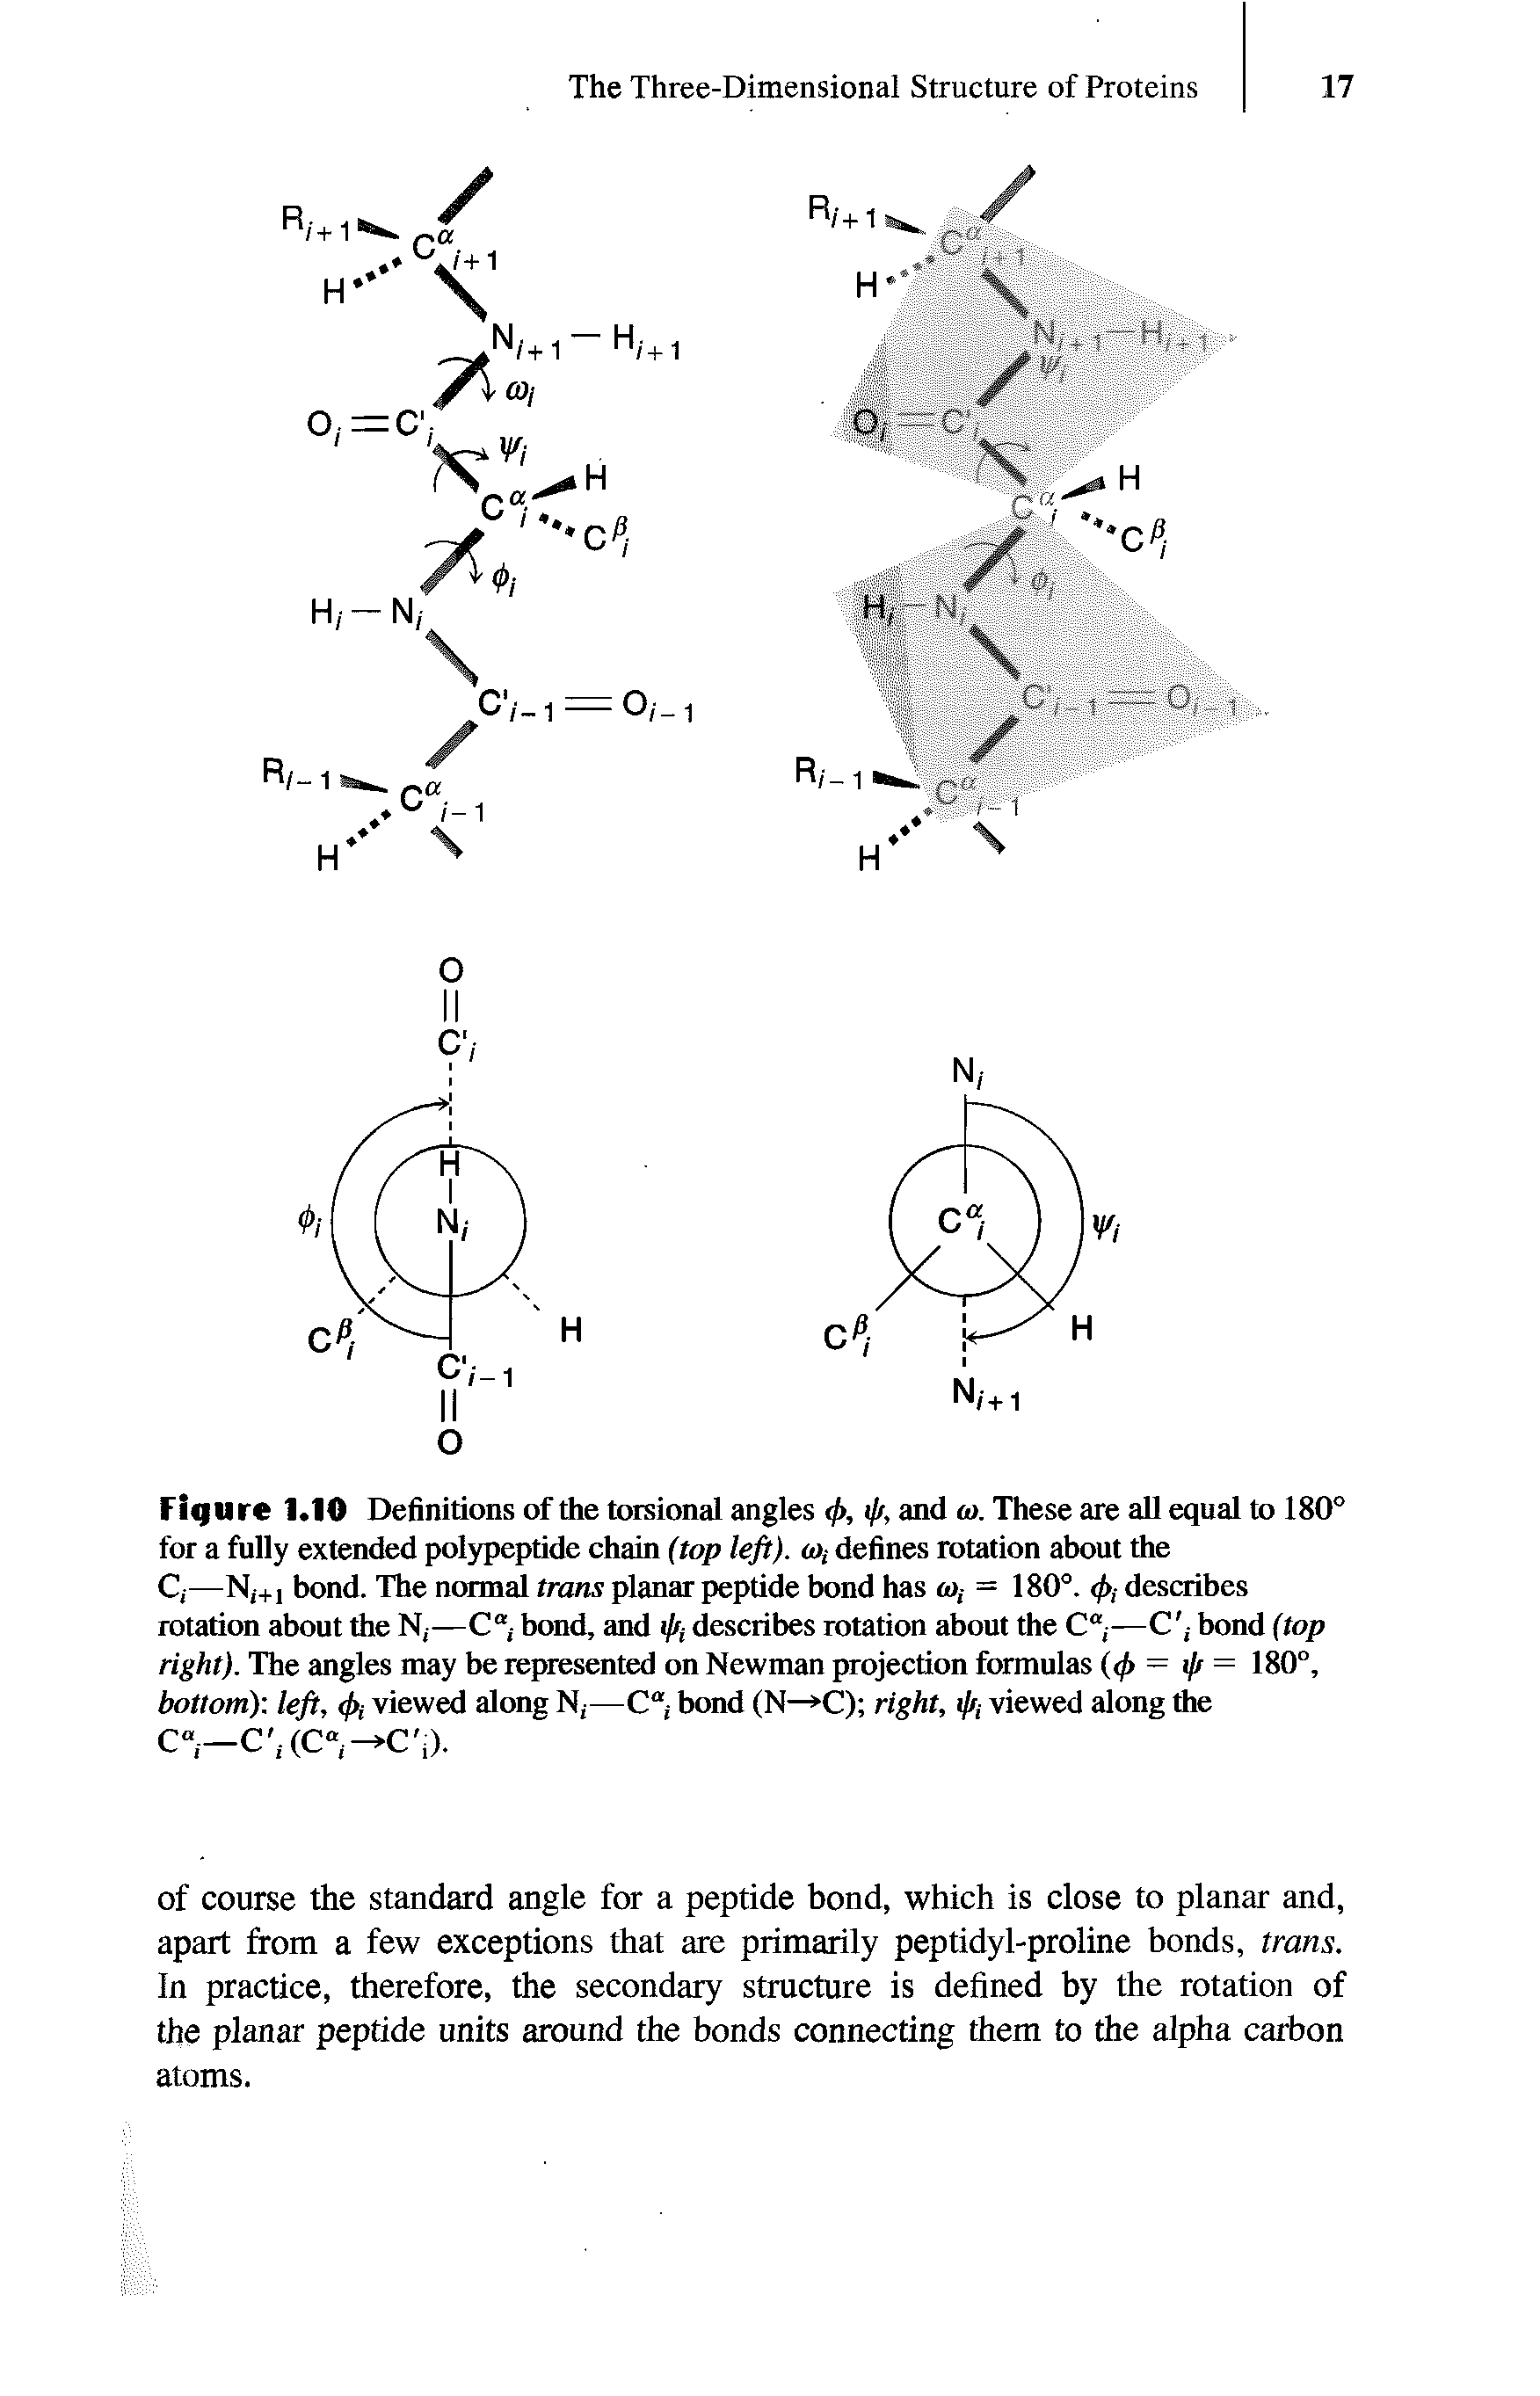 Figure 1.10 Definitions of the torsional angles fa ip, and w. These are all equal to 180° for a fully extended polypeptide chain (top left). to, defines rotation about the C,—Nl+1 bond. The normal tram planar peptide bond has <u,- = 180°. fa describes rotation about the N,—C bond, and i// describes rotation about the C —C bond (top right). The angles may be represented on Newman projection formulas (<j> = i/r = 180°, bottom) left, fa viewed along N —C bond (N >C) right, fa viewed along the C —C(C , — C j).